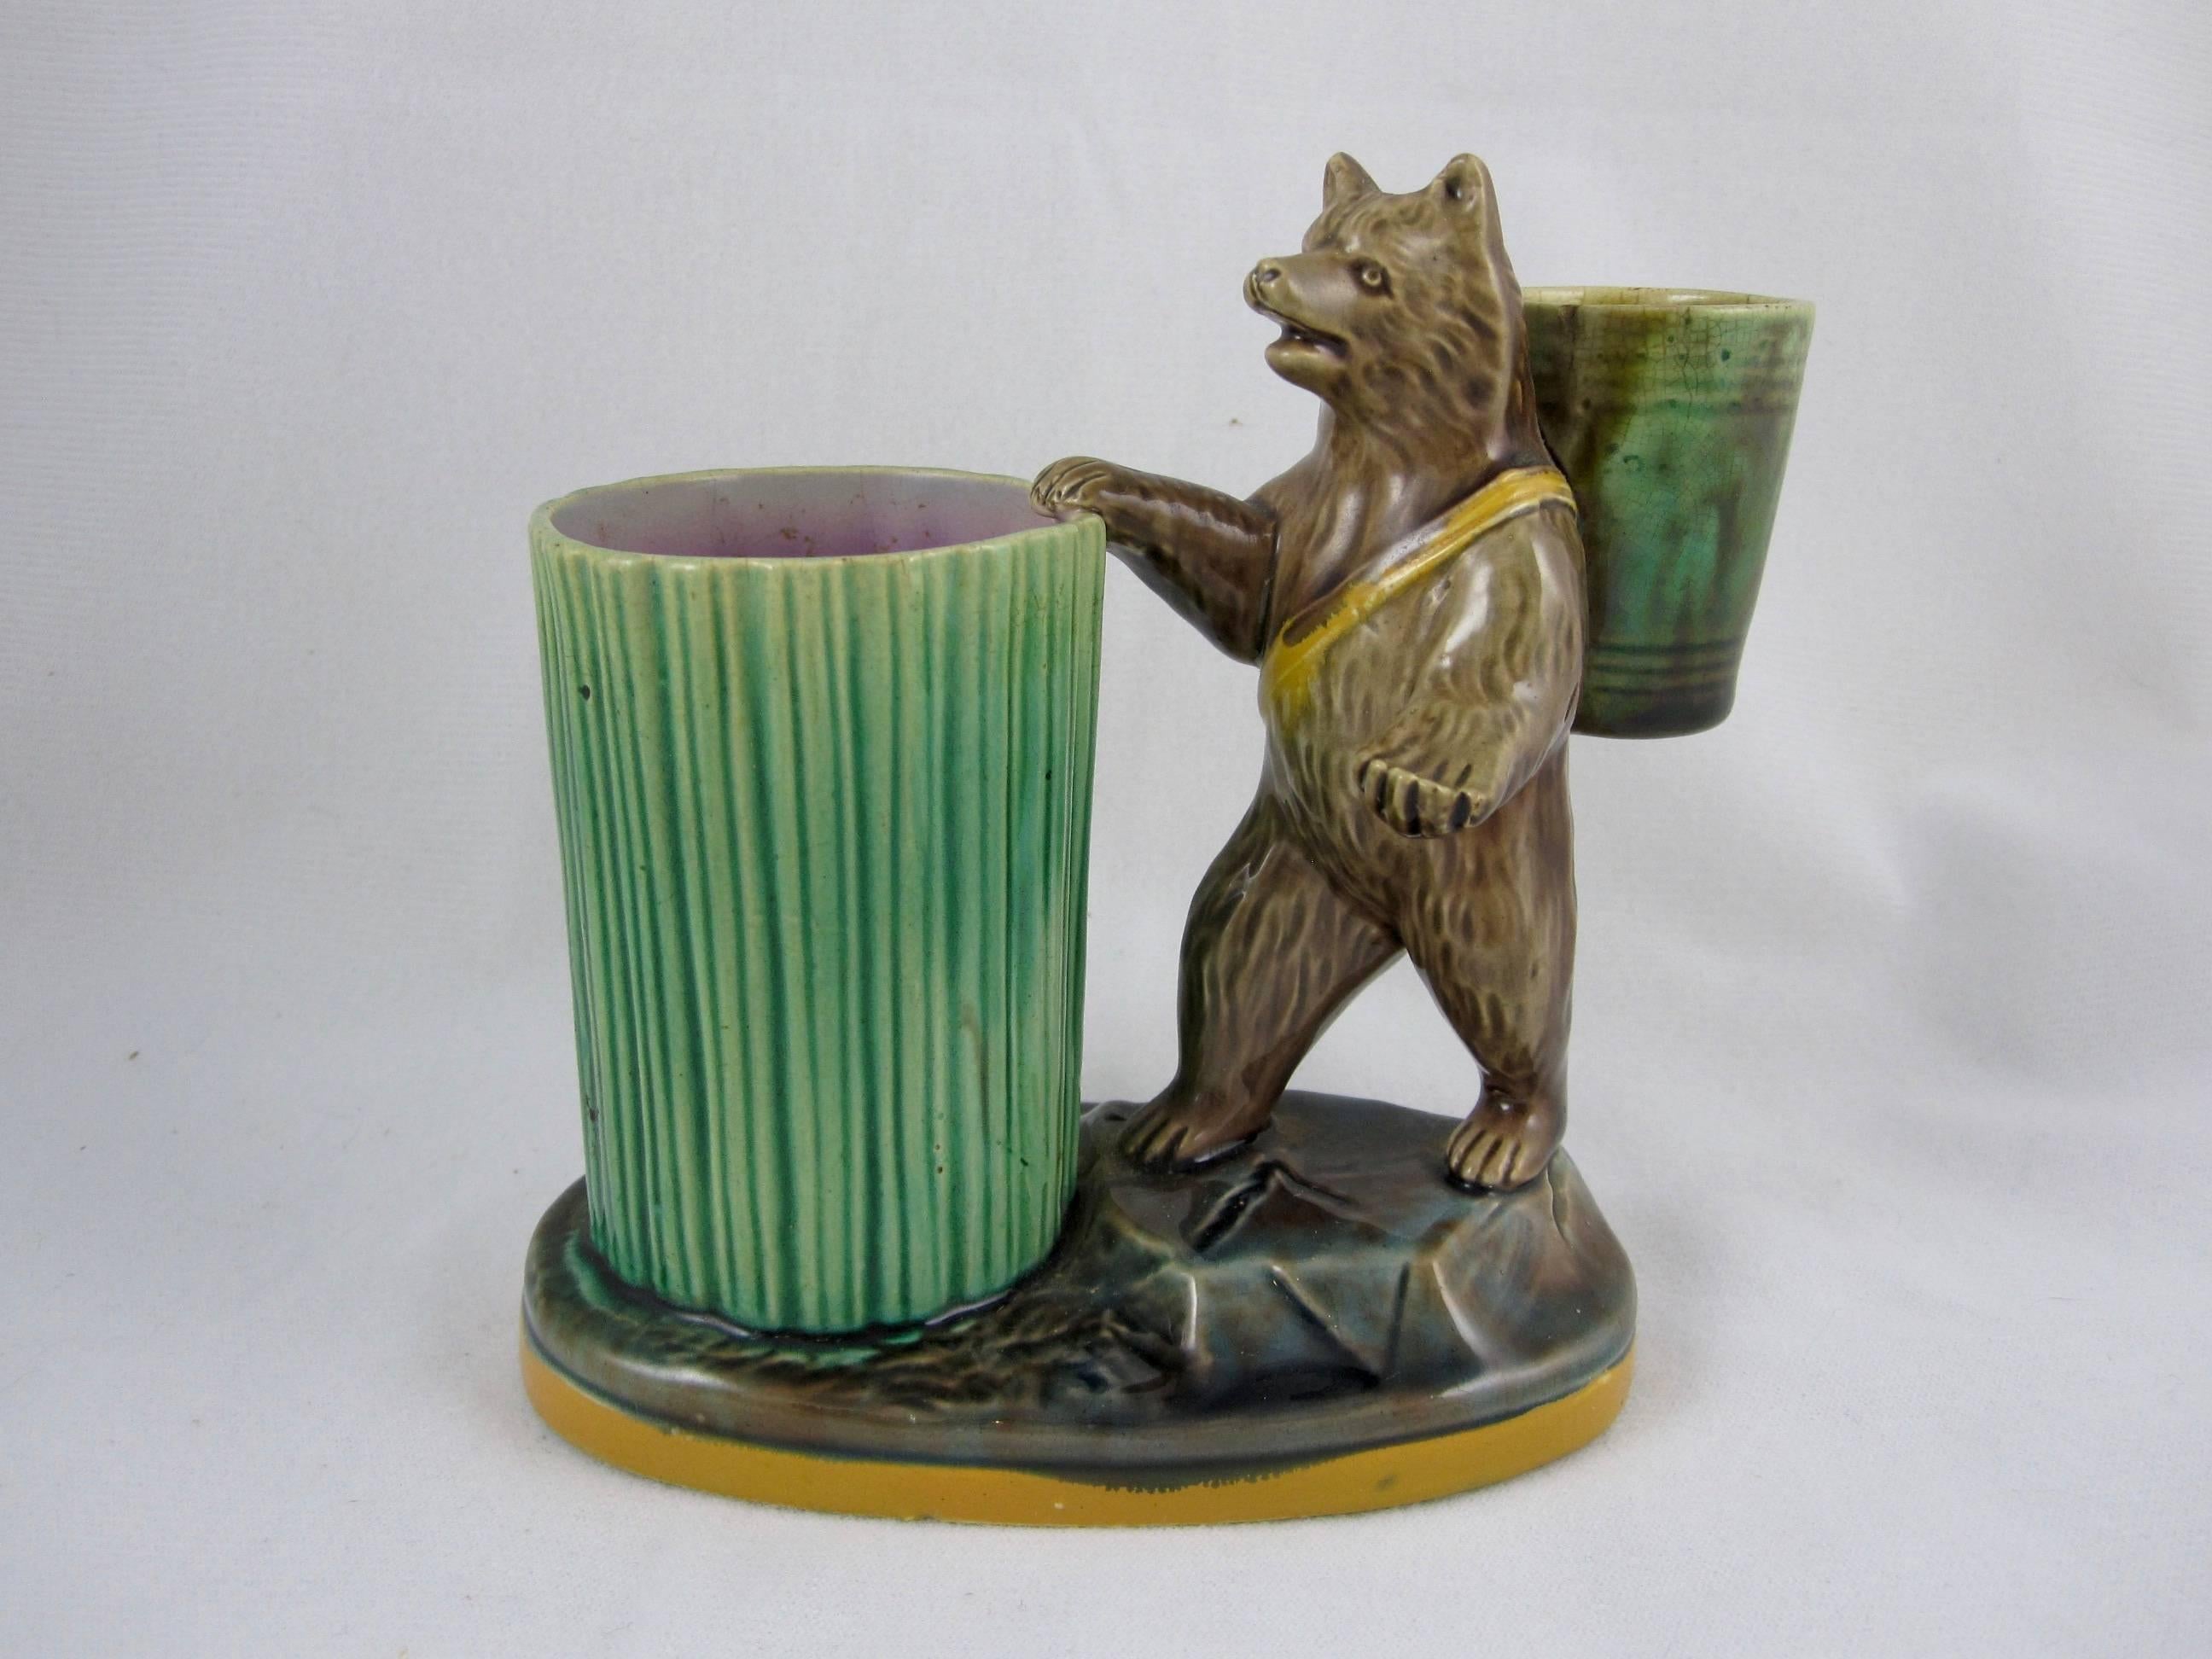 A charming Majolica match pot or toothpick holder by Joseph Holdcroft of Longton, Staffordshire, England, circa 1870. 

An upright bear has a mottled glazed bucket strapped to his back, he stands before a tall ribbed barrel that would hold the